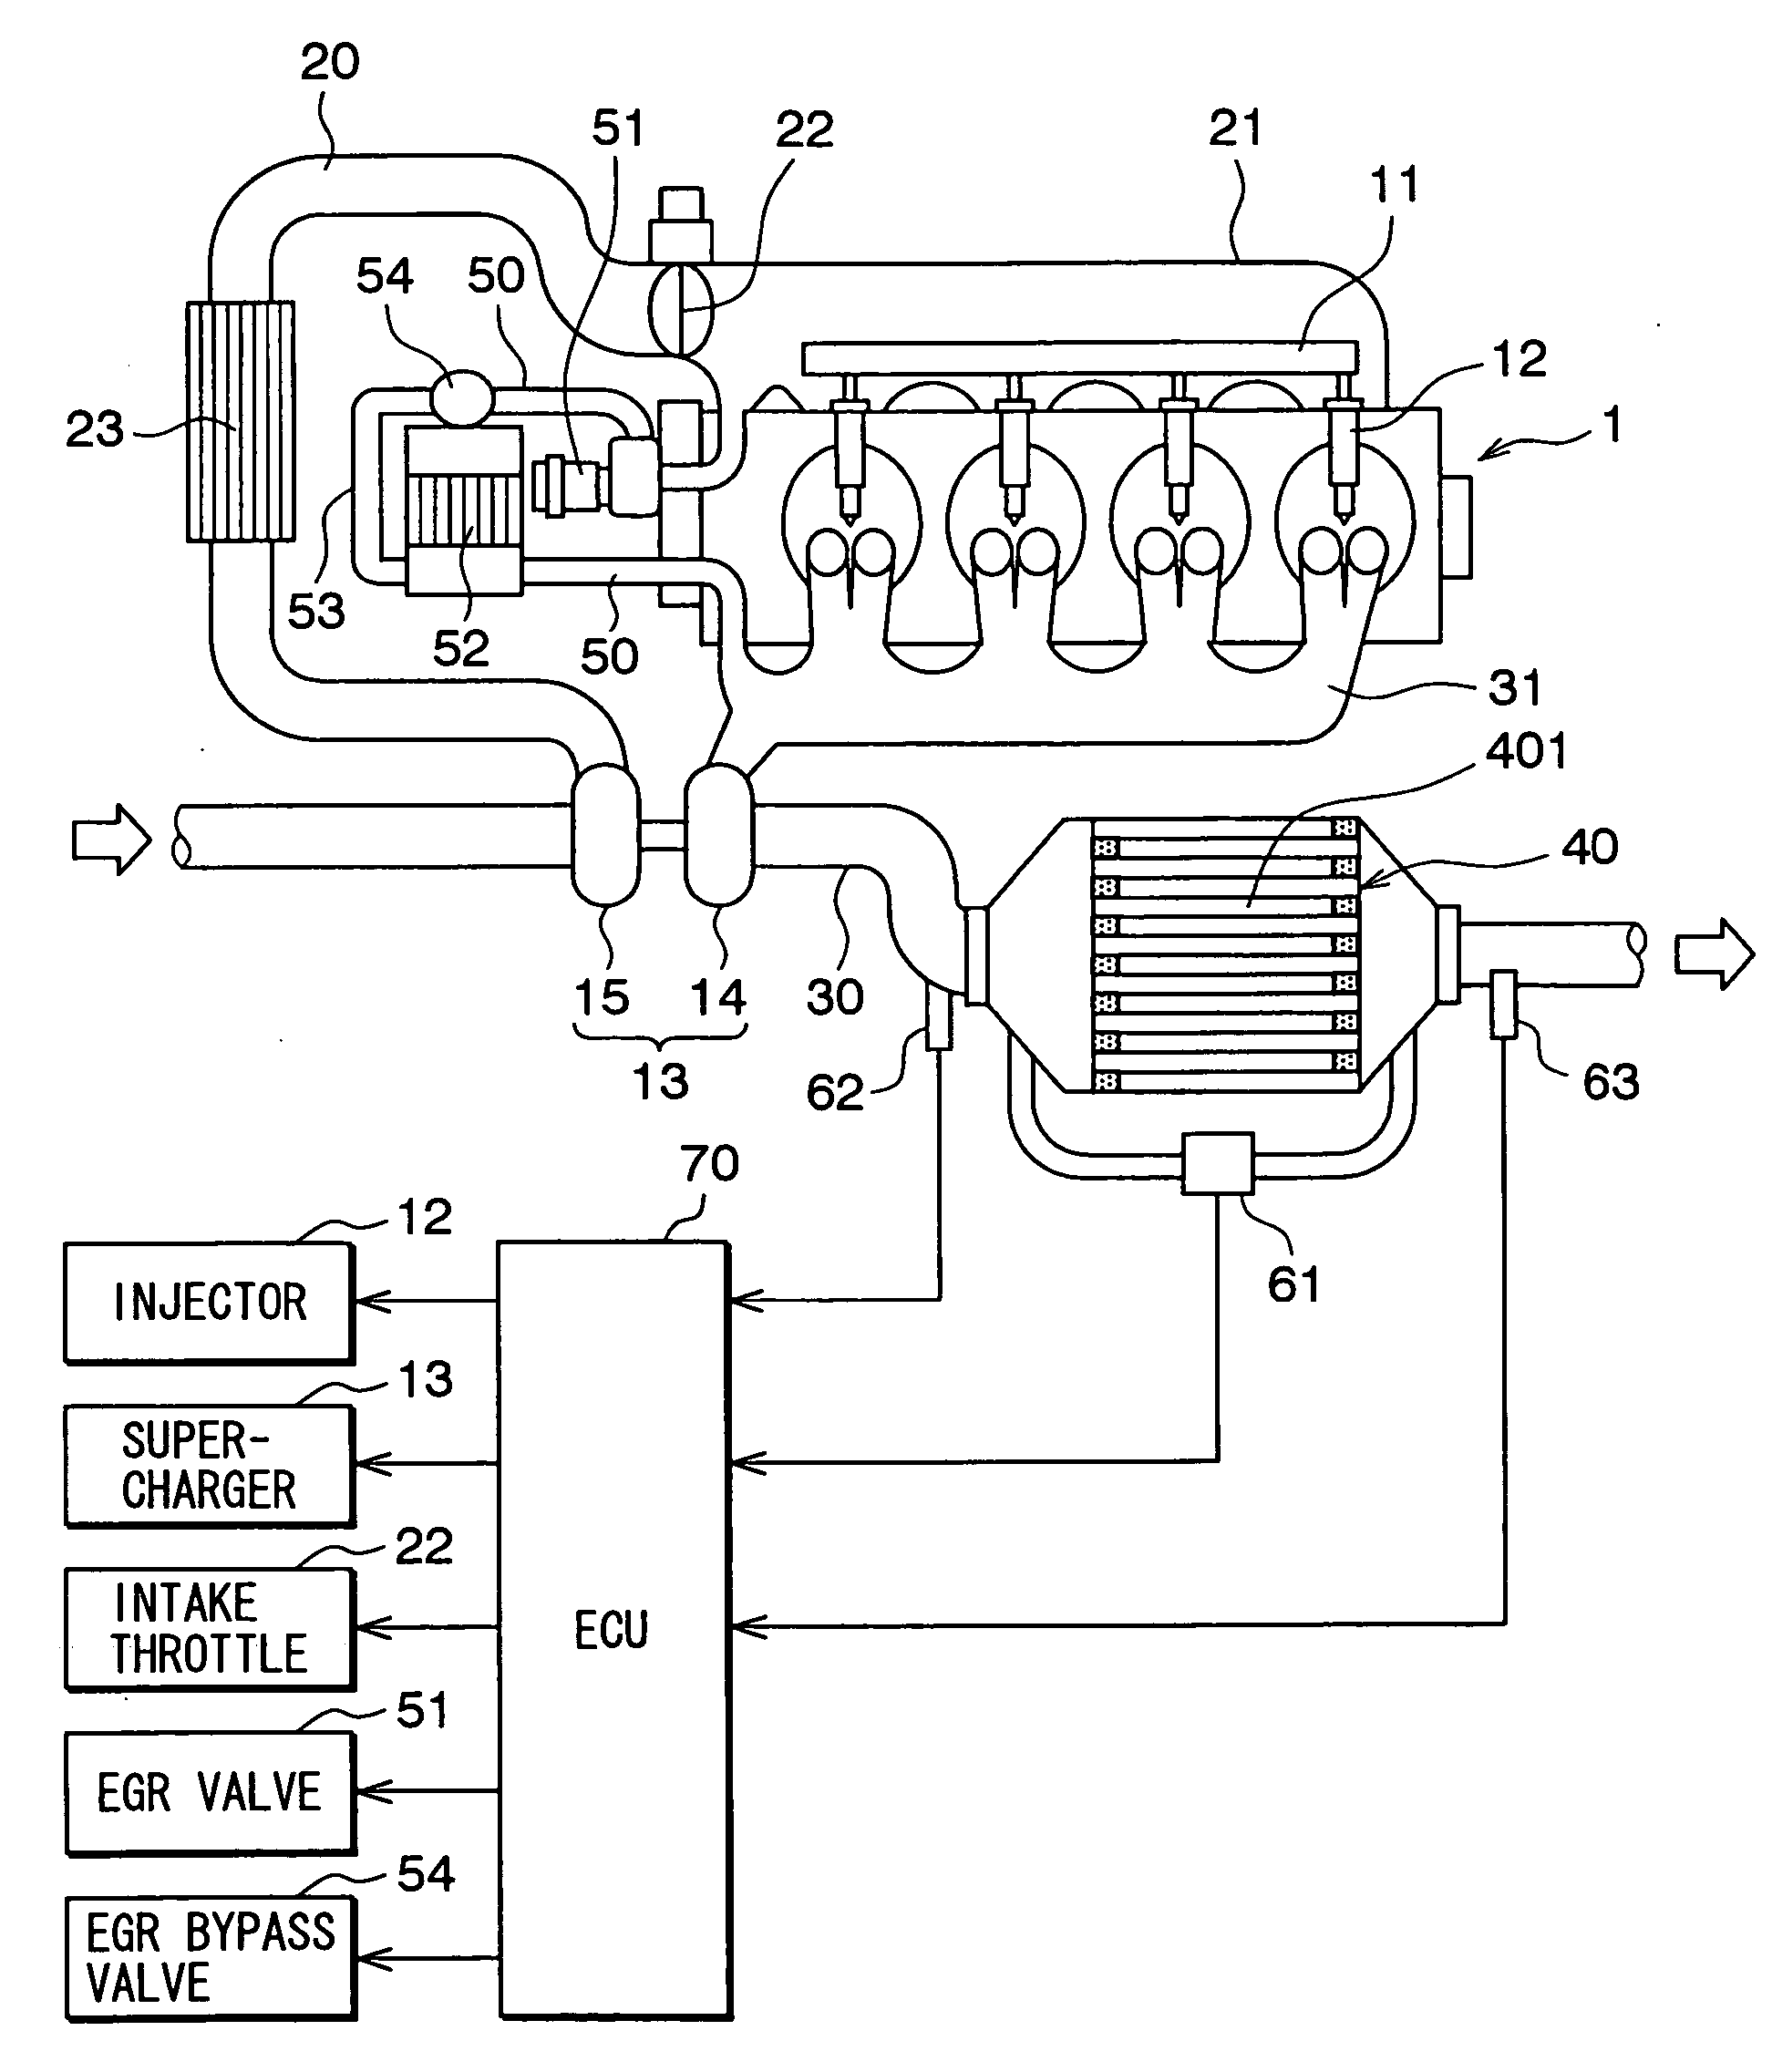 Exhaust emission control system for internal combustion engine